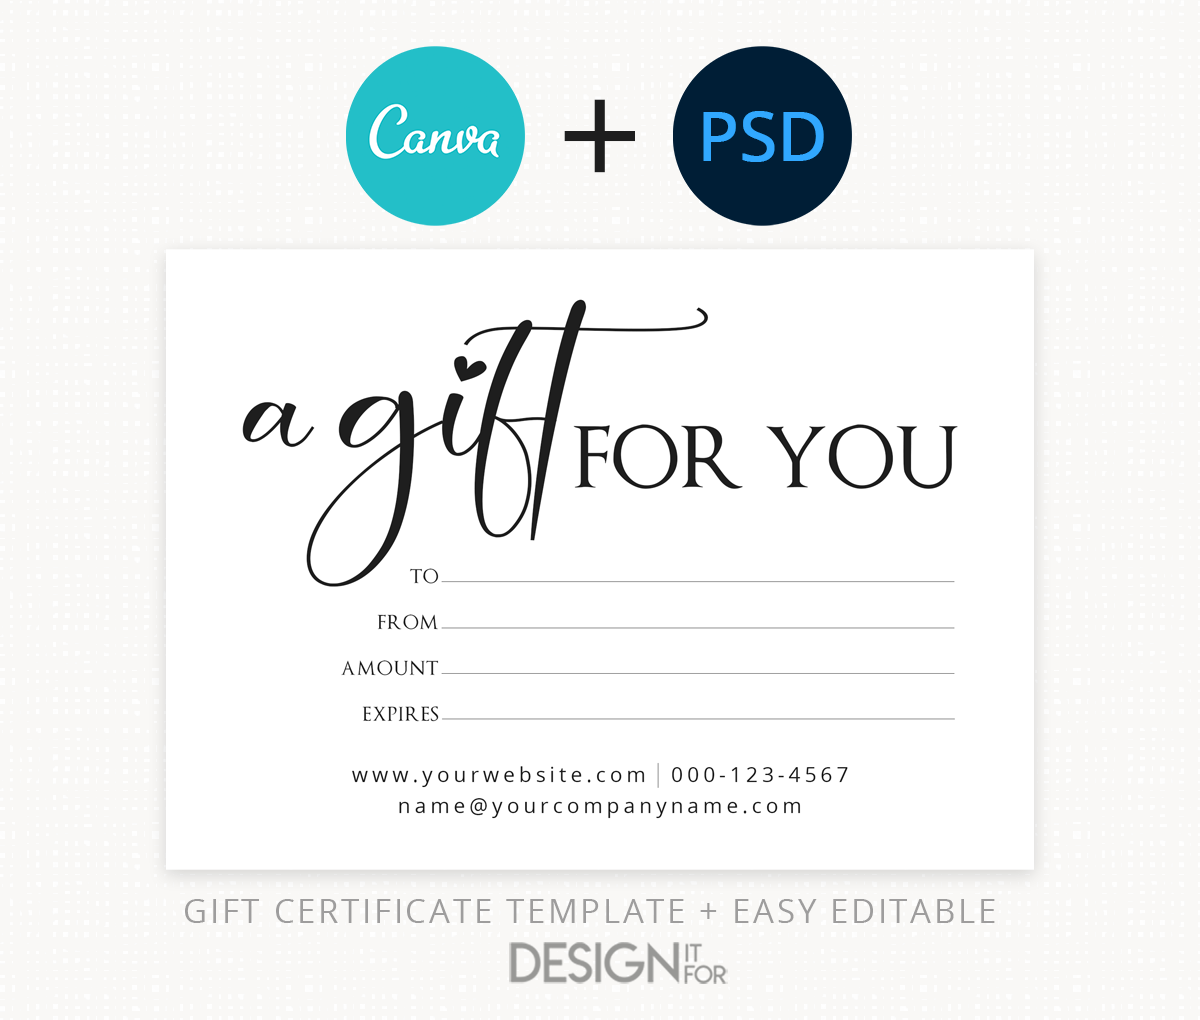 Gift Certificate Template, Editable Gift Certificate Template, Canva, PSD, Printable, Digital Gift Certificate, 5x7 Gift Card Template 1